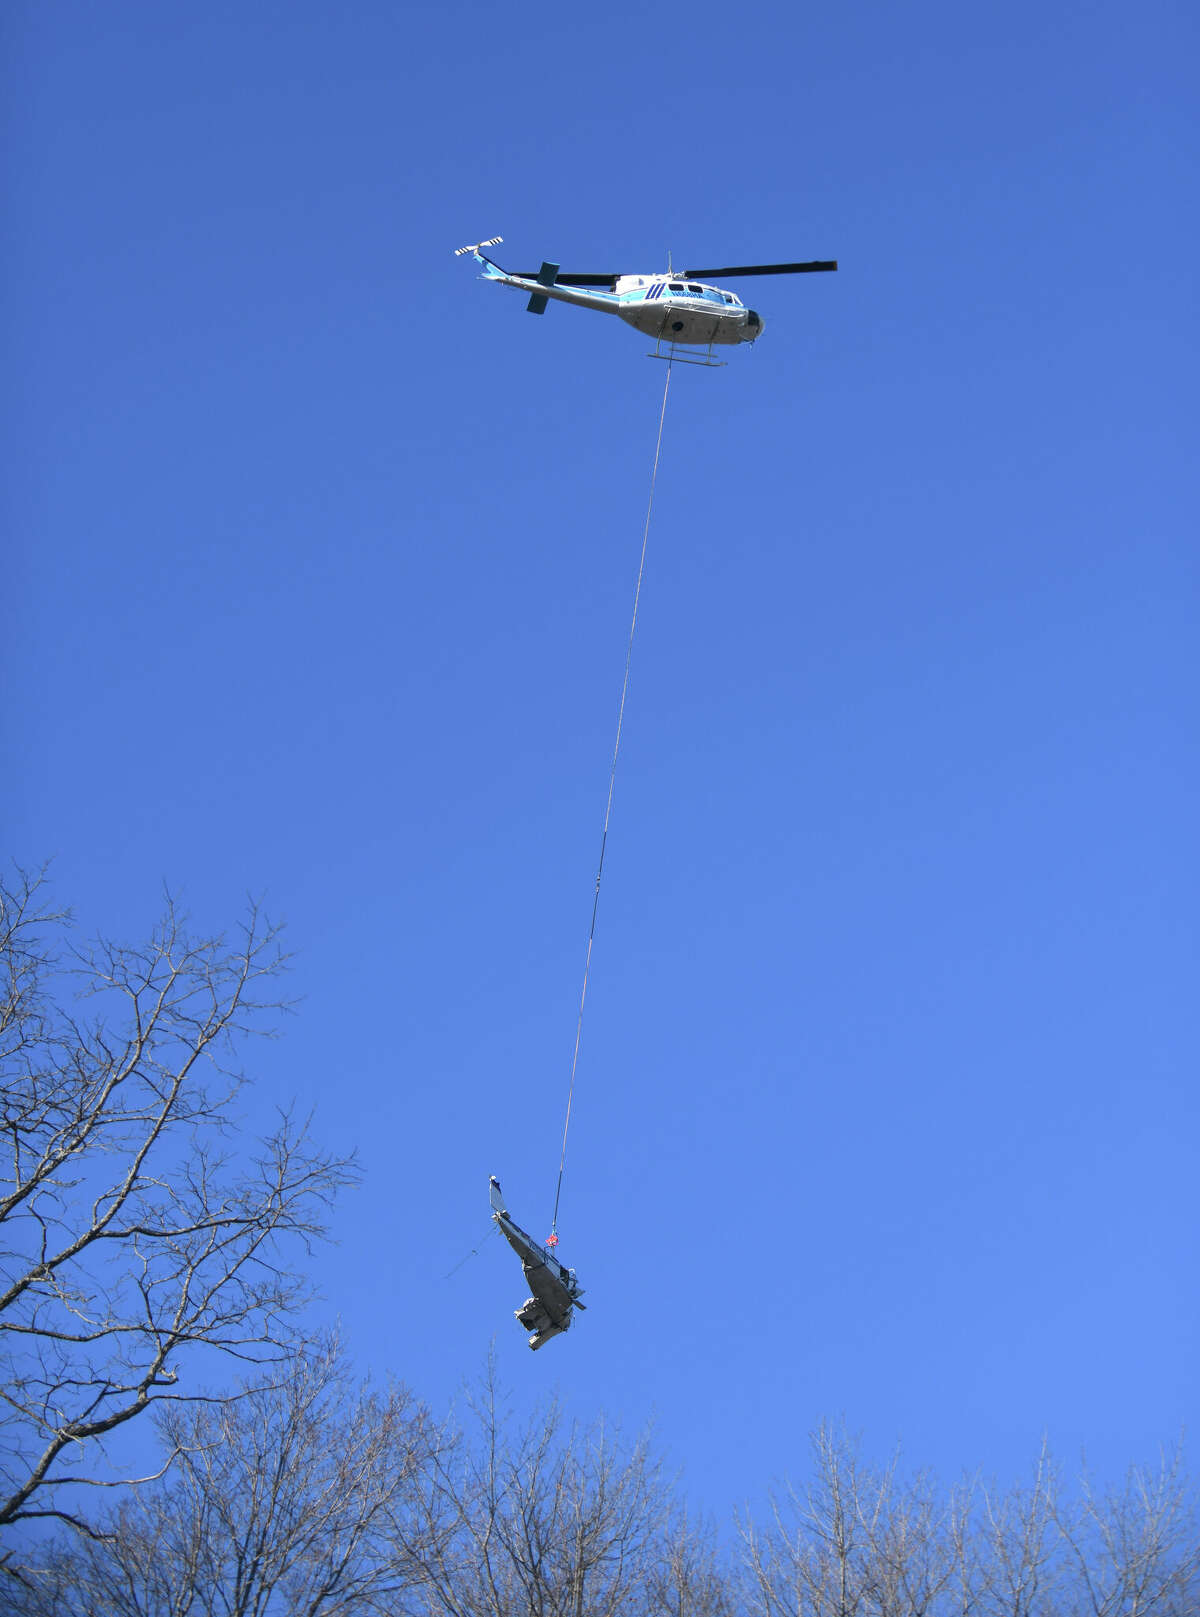 A helicopter airlifts the wreckage from a plane crash last week just across the Greenwich border in Armonk, N.Y. Tuesday, Jan. 24, 2023. Last Thursday, two Ohio residents were killed when their single-engine Beechcraft Bonanza A36 crashed off Rye Lake in Armonk, less than a mile from the Westchester County Airport.